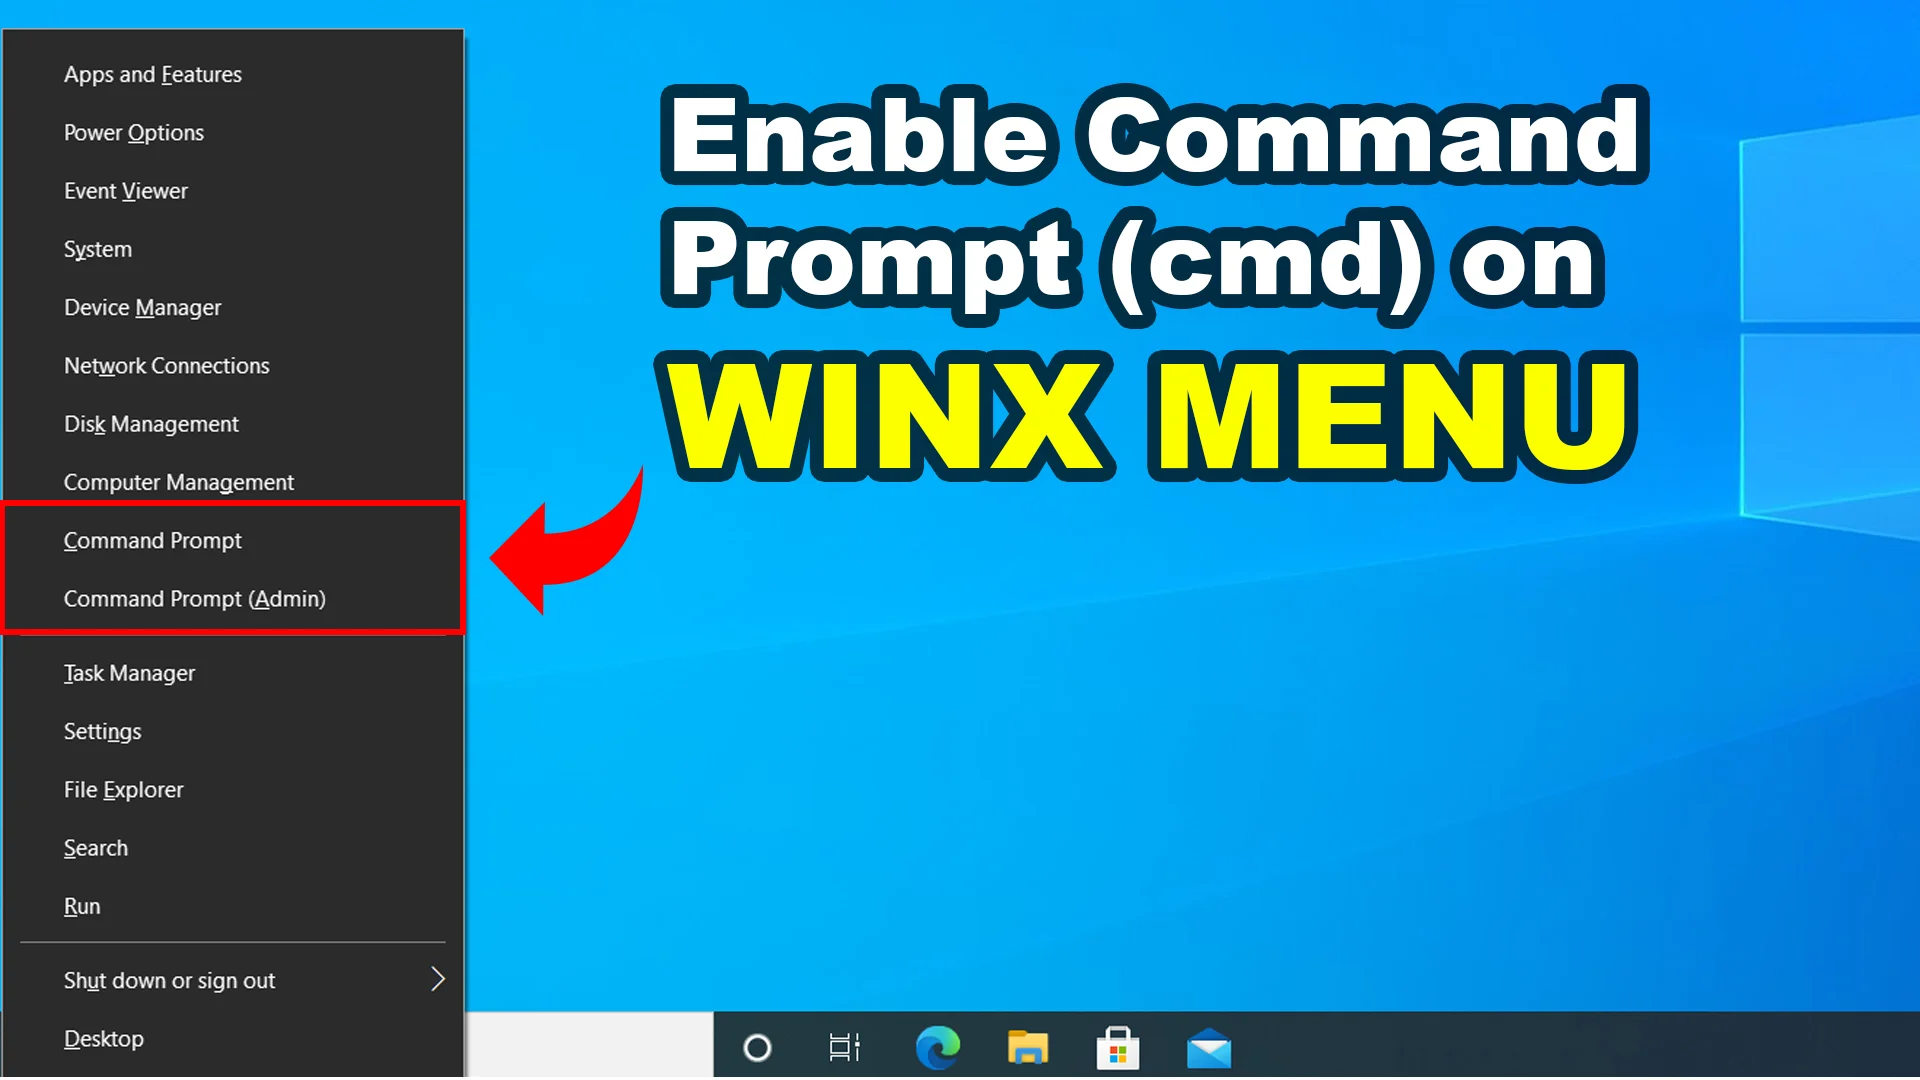 How to enable Command Prompt on WinX Menu in Windows 10